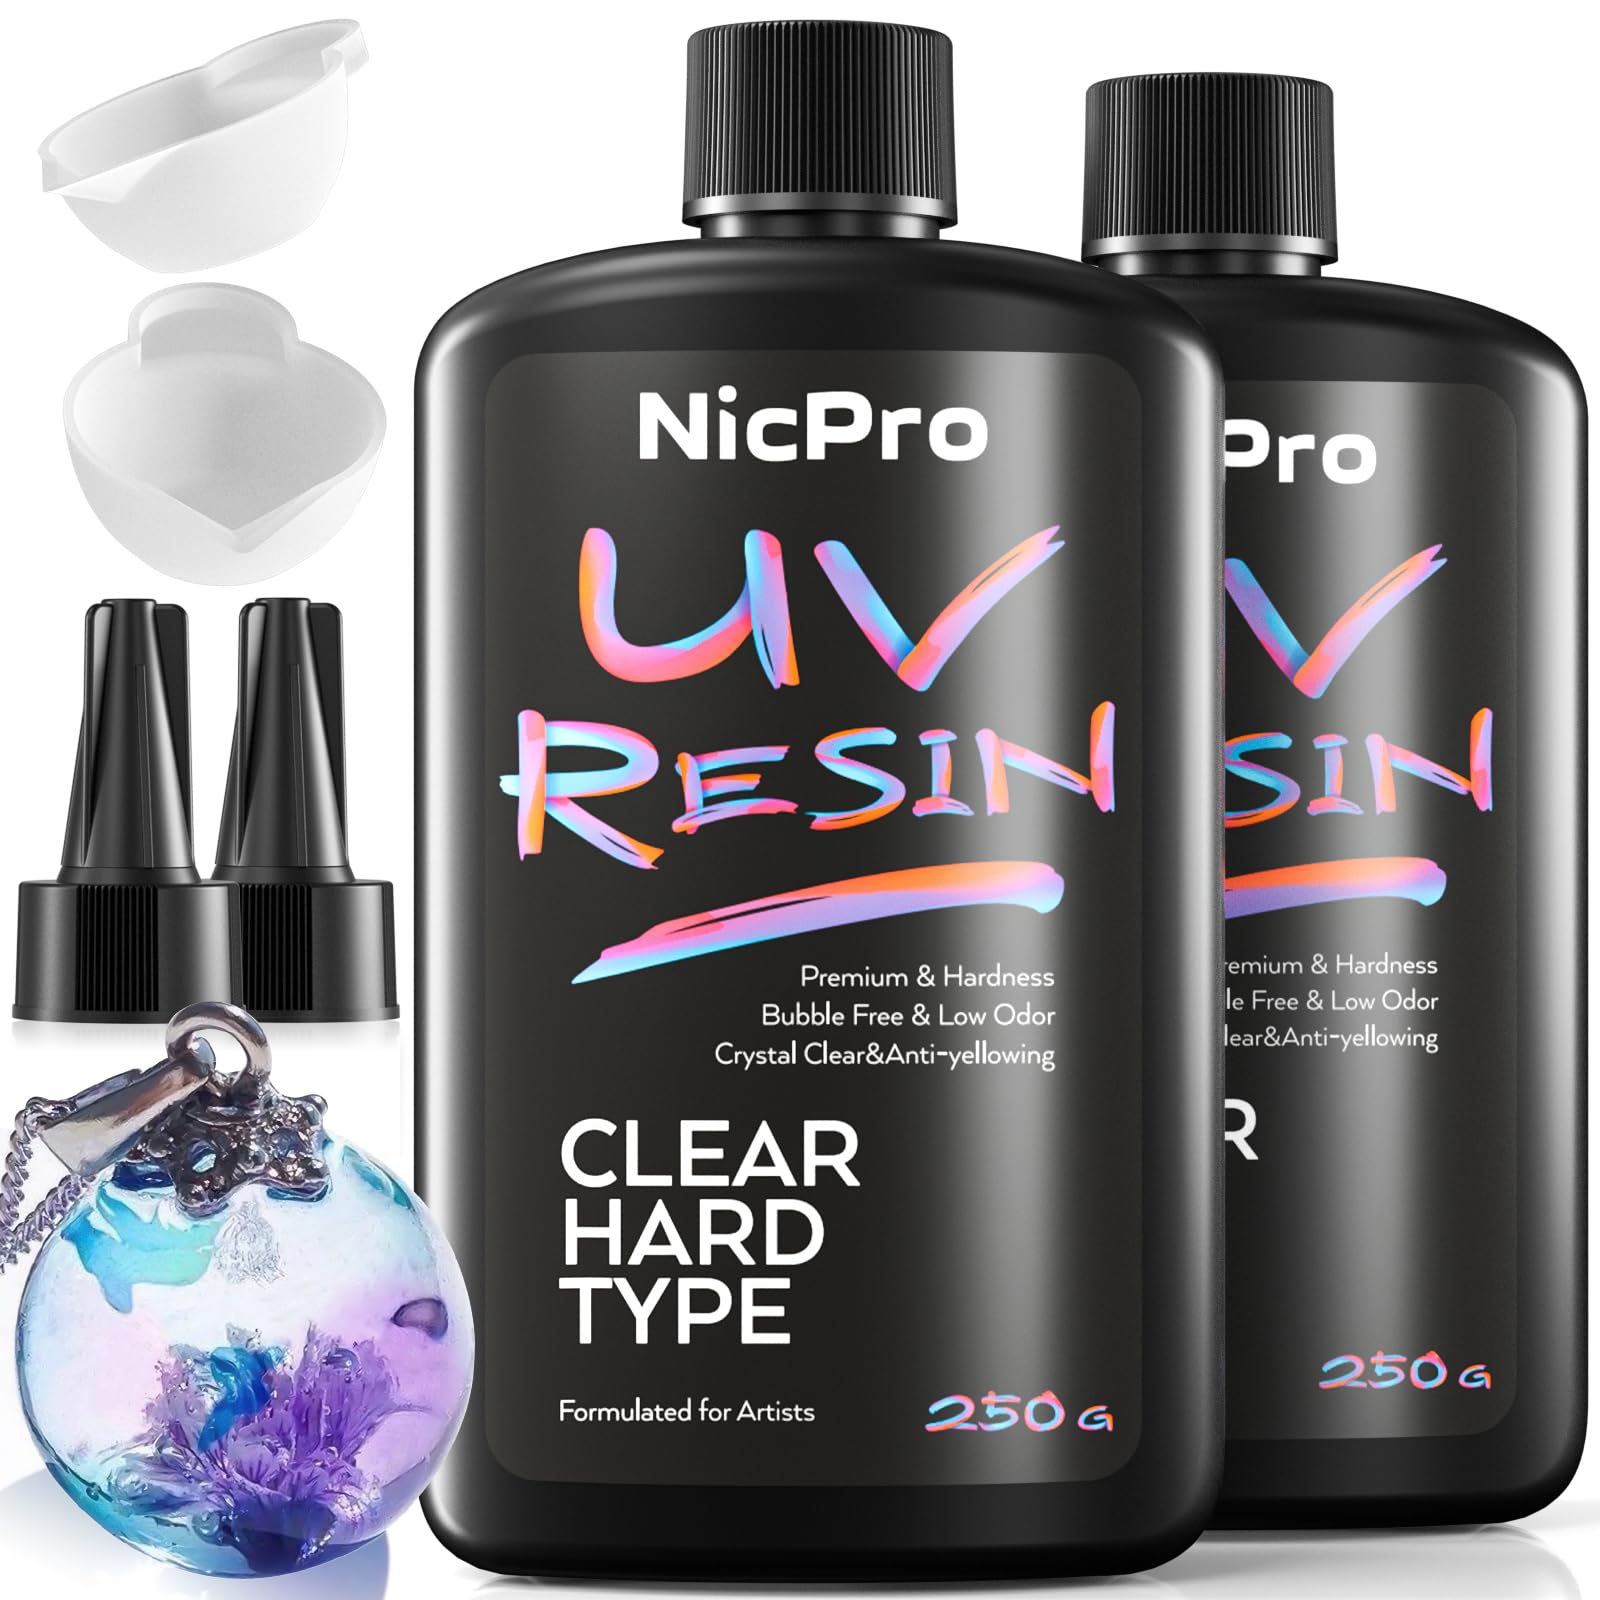 Nicpro UV Resin 500g, 2 PCS Crystal Clear UV Epoxy Resin Kit, High Viscosity & Quick Curing UV Glue Hard, UV Cured Resin for Jewelry Making, Craft, Doming, DIY and Coating